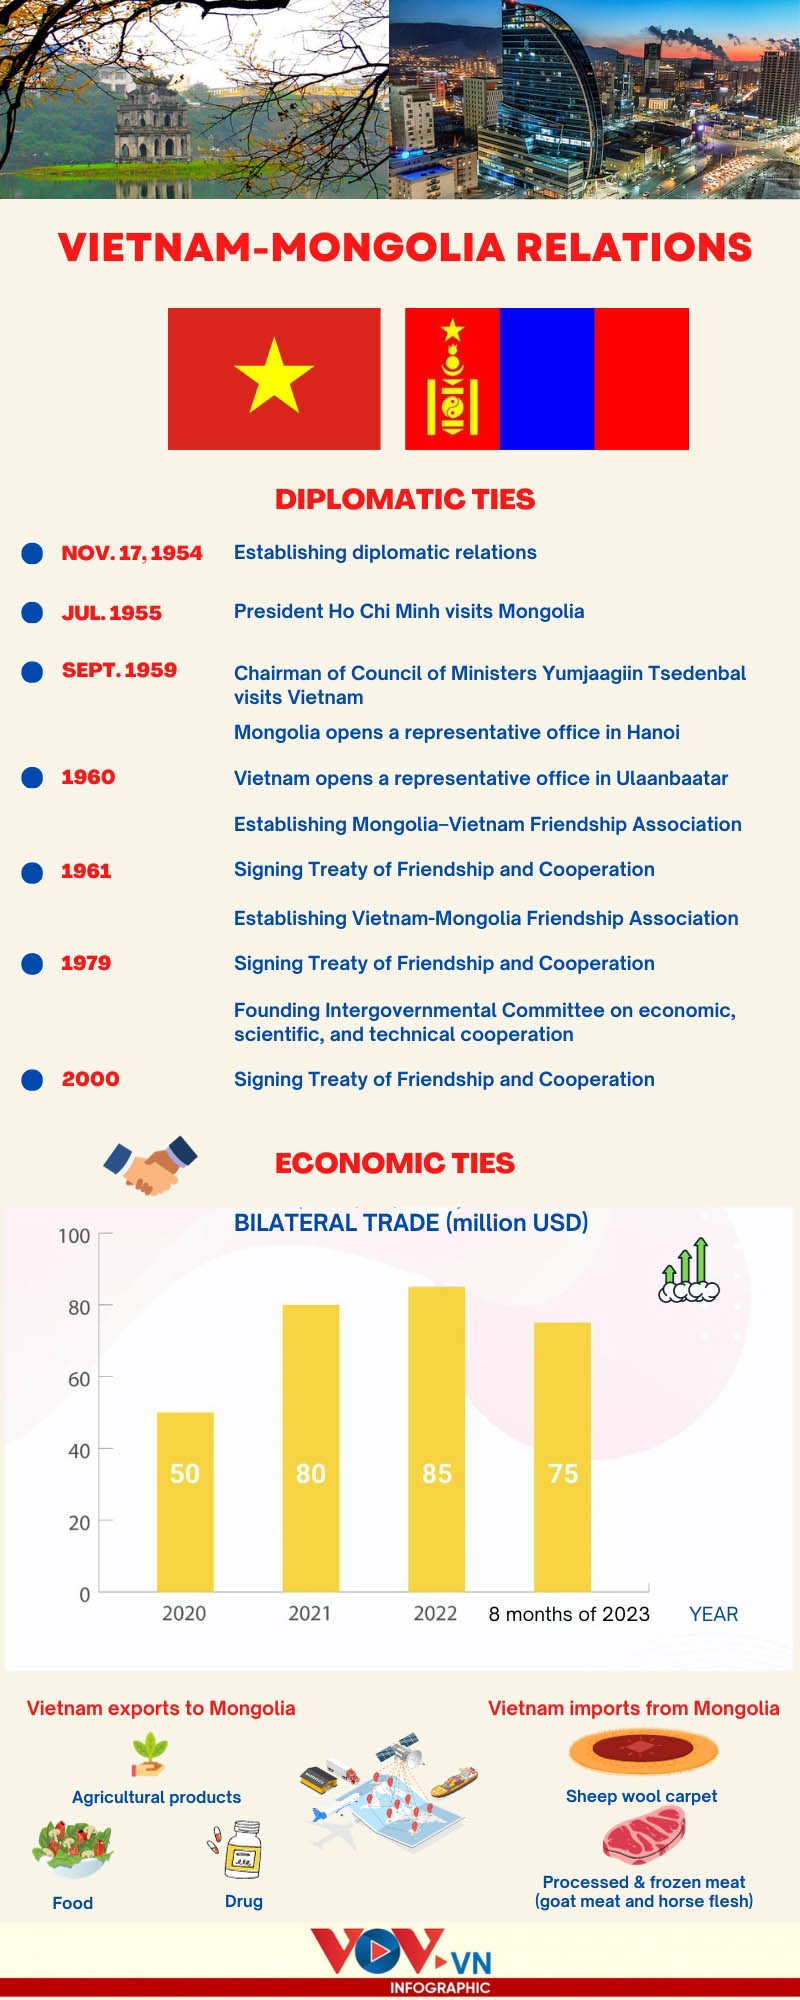 Over the past 69 years, the traditional friendship and cooperative relations between Vietnam and Mongolia have developed positively through the exchange of visits and bilateral cooperation mechanisms.